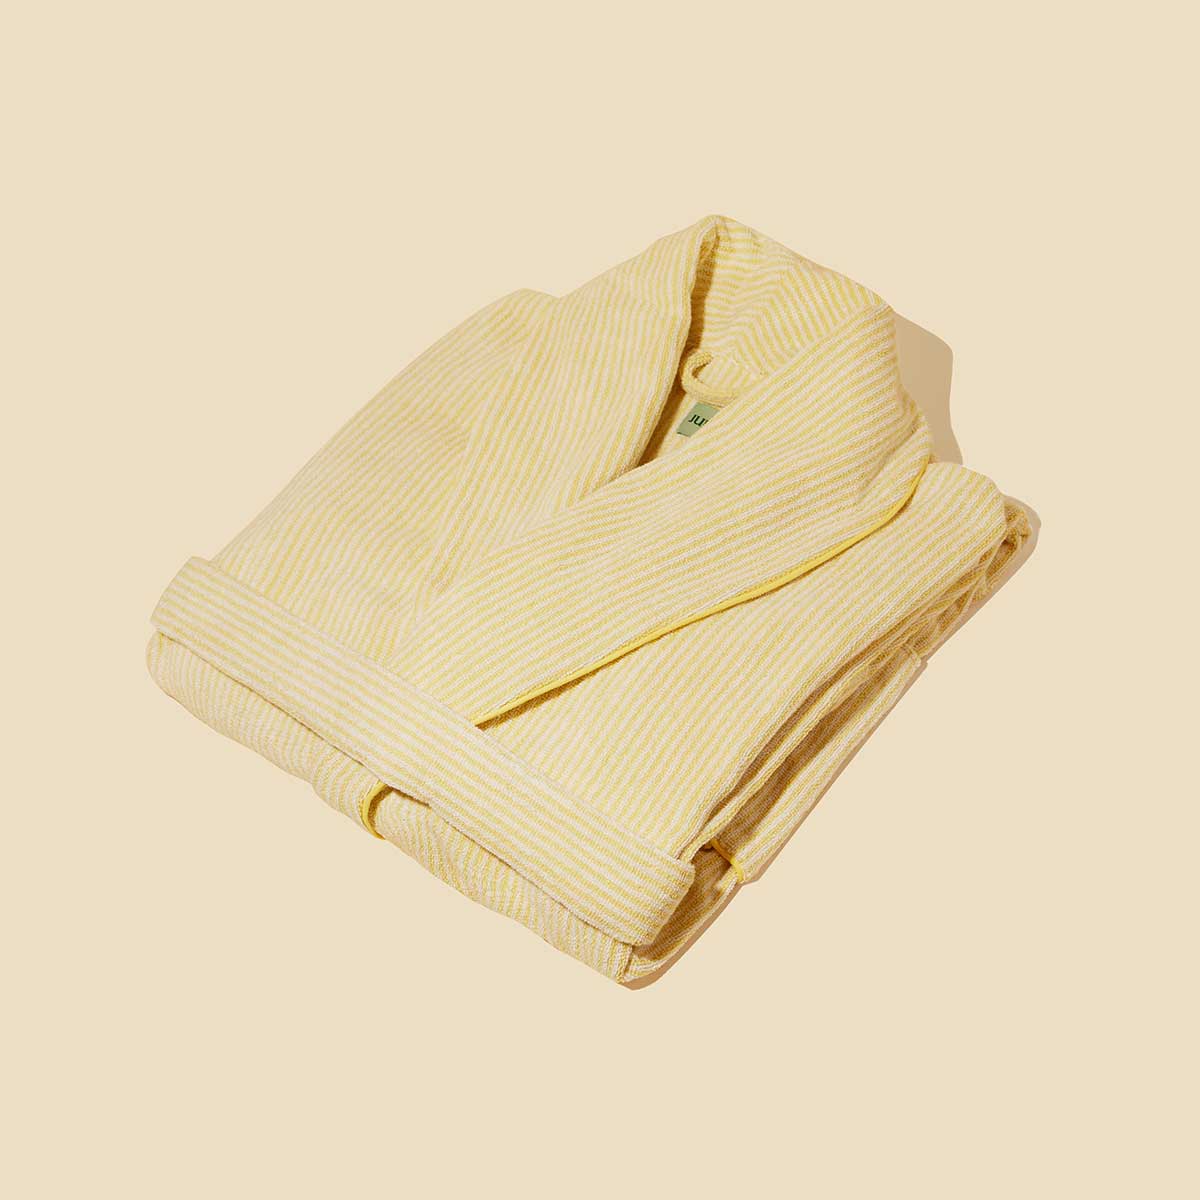 Our Finca Bathrobe Lemon Yellow is here - Check it out!